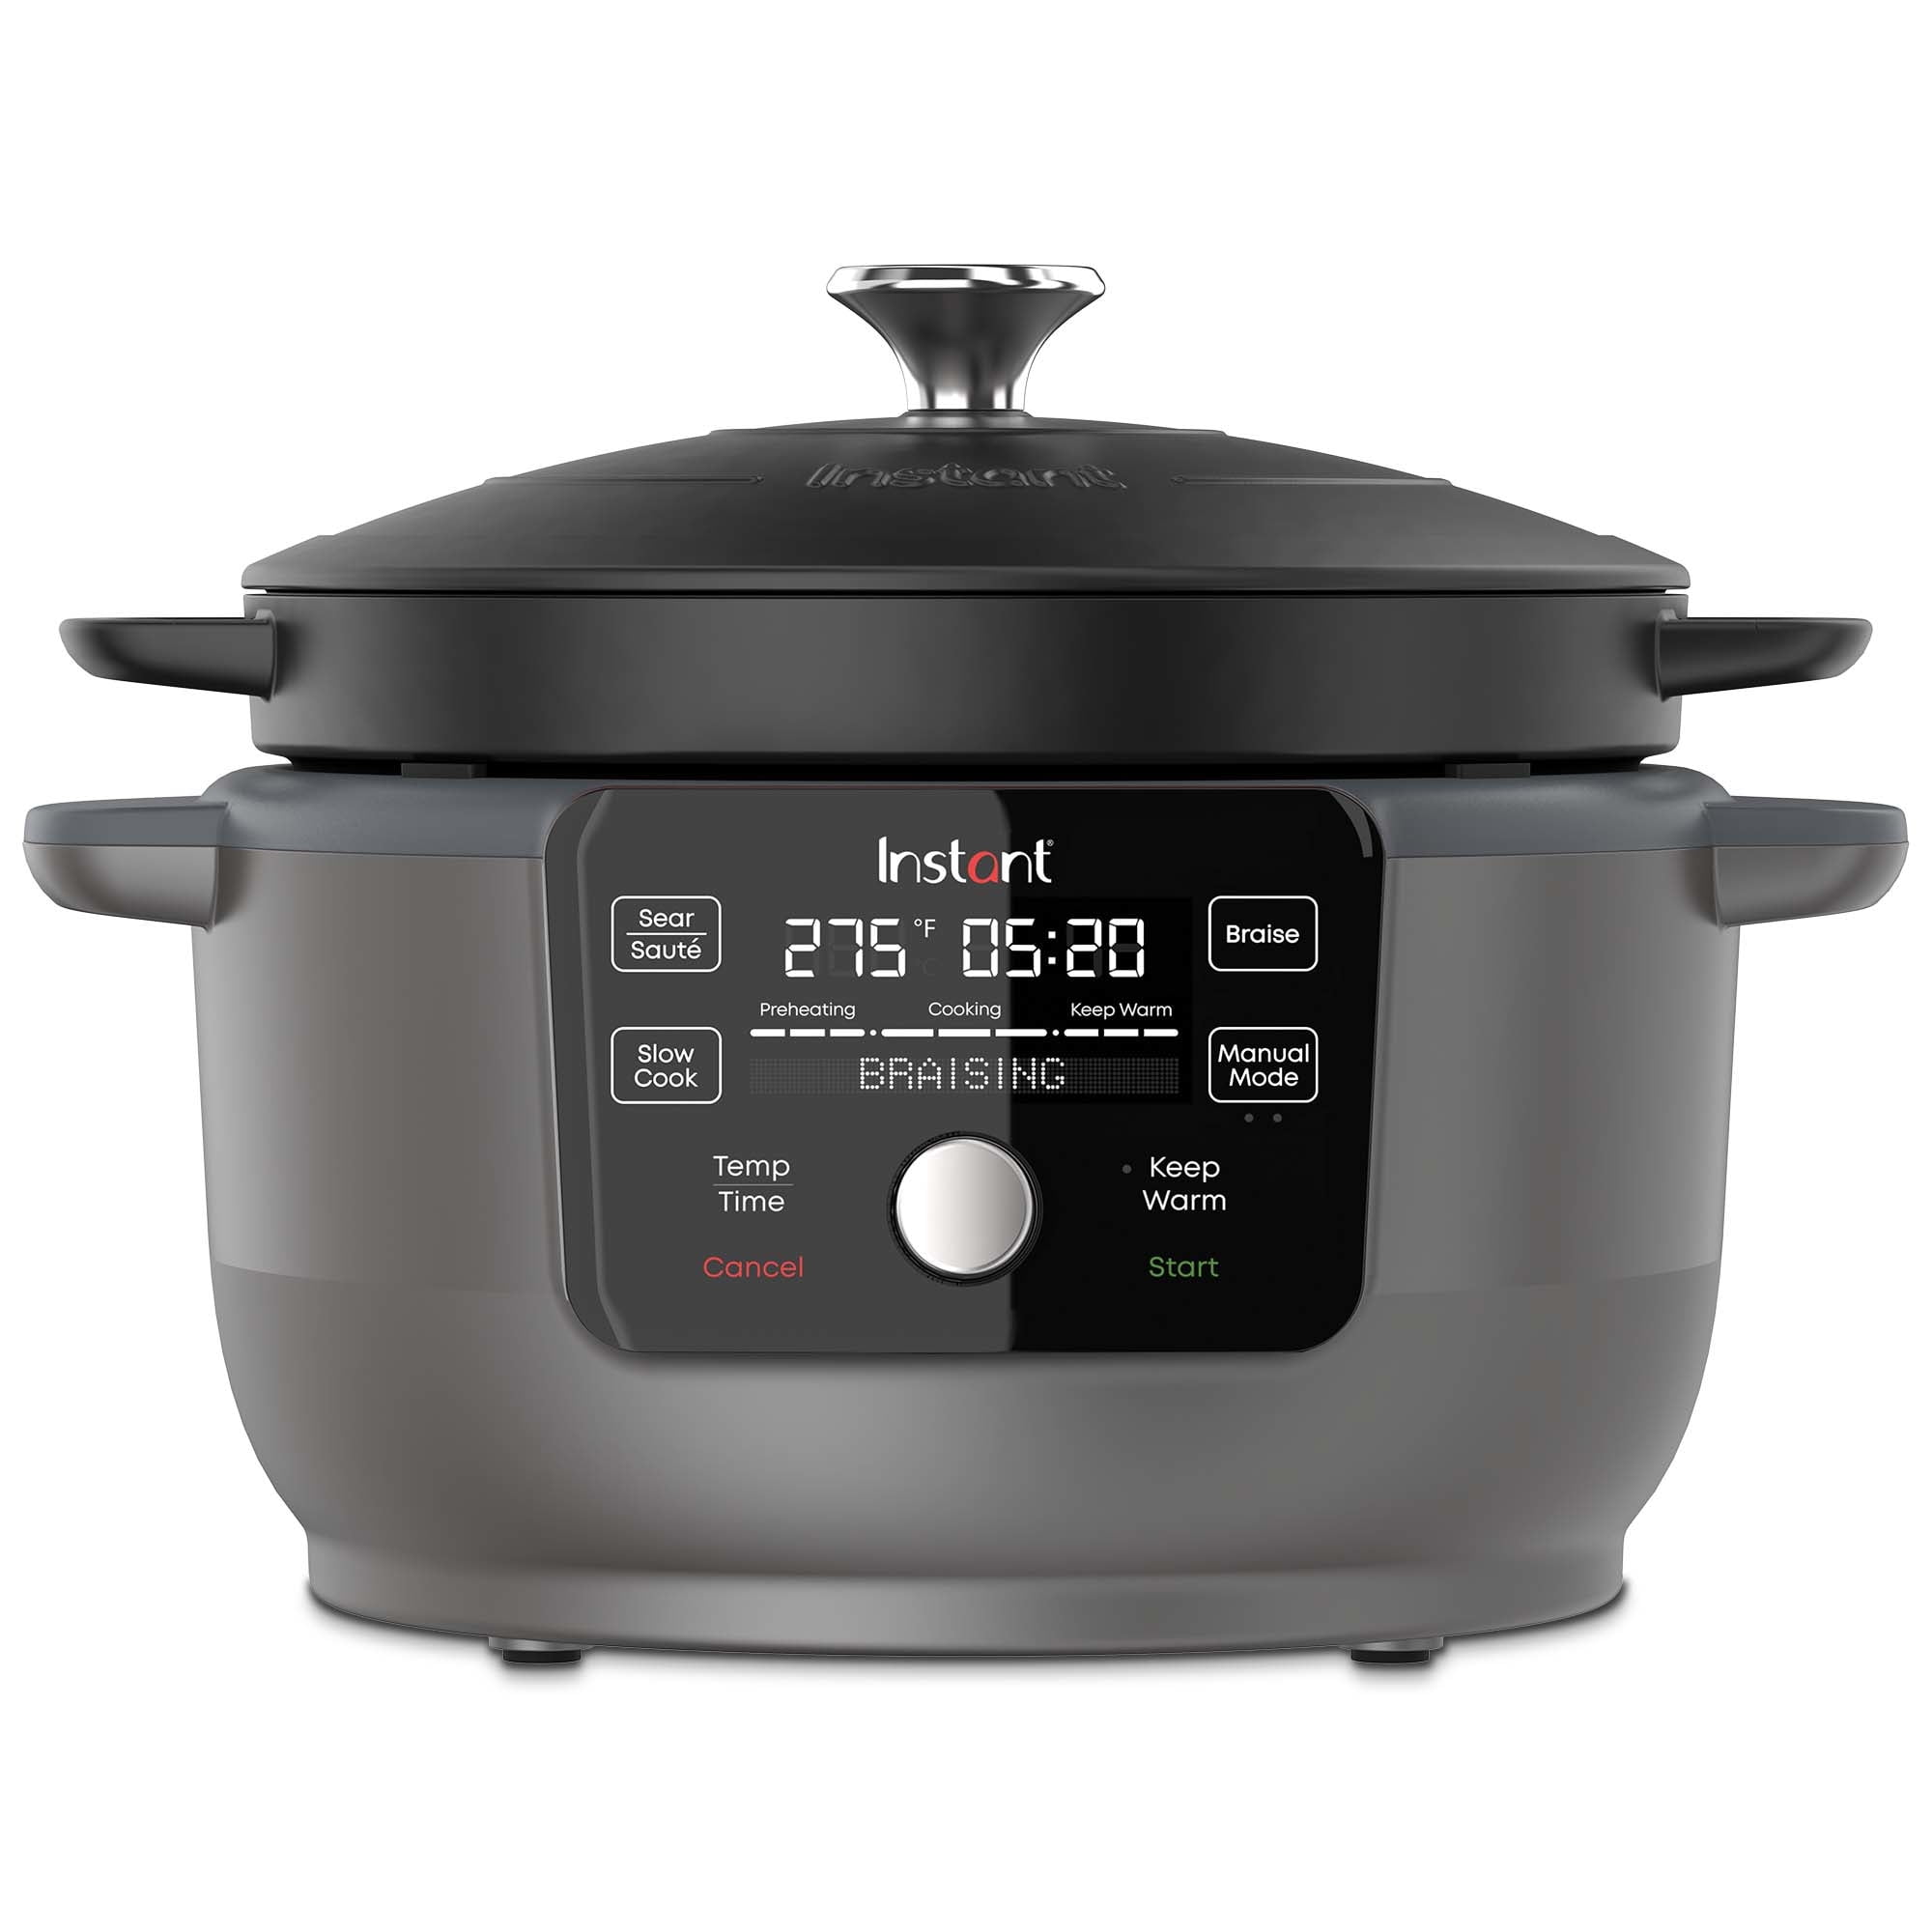  Instant Electric Round Dutch Oven, 6-Quart 1500W, From the  Makers of Instant Pot, 5-in-1: Braise, Slow Cook, Sear/Sauté, Cooking Pan,  Food Warmer, Enameled Cast Iron, Included Recipe Book, Blue: Home 